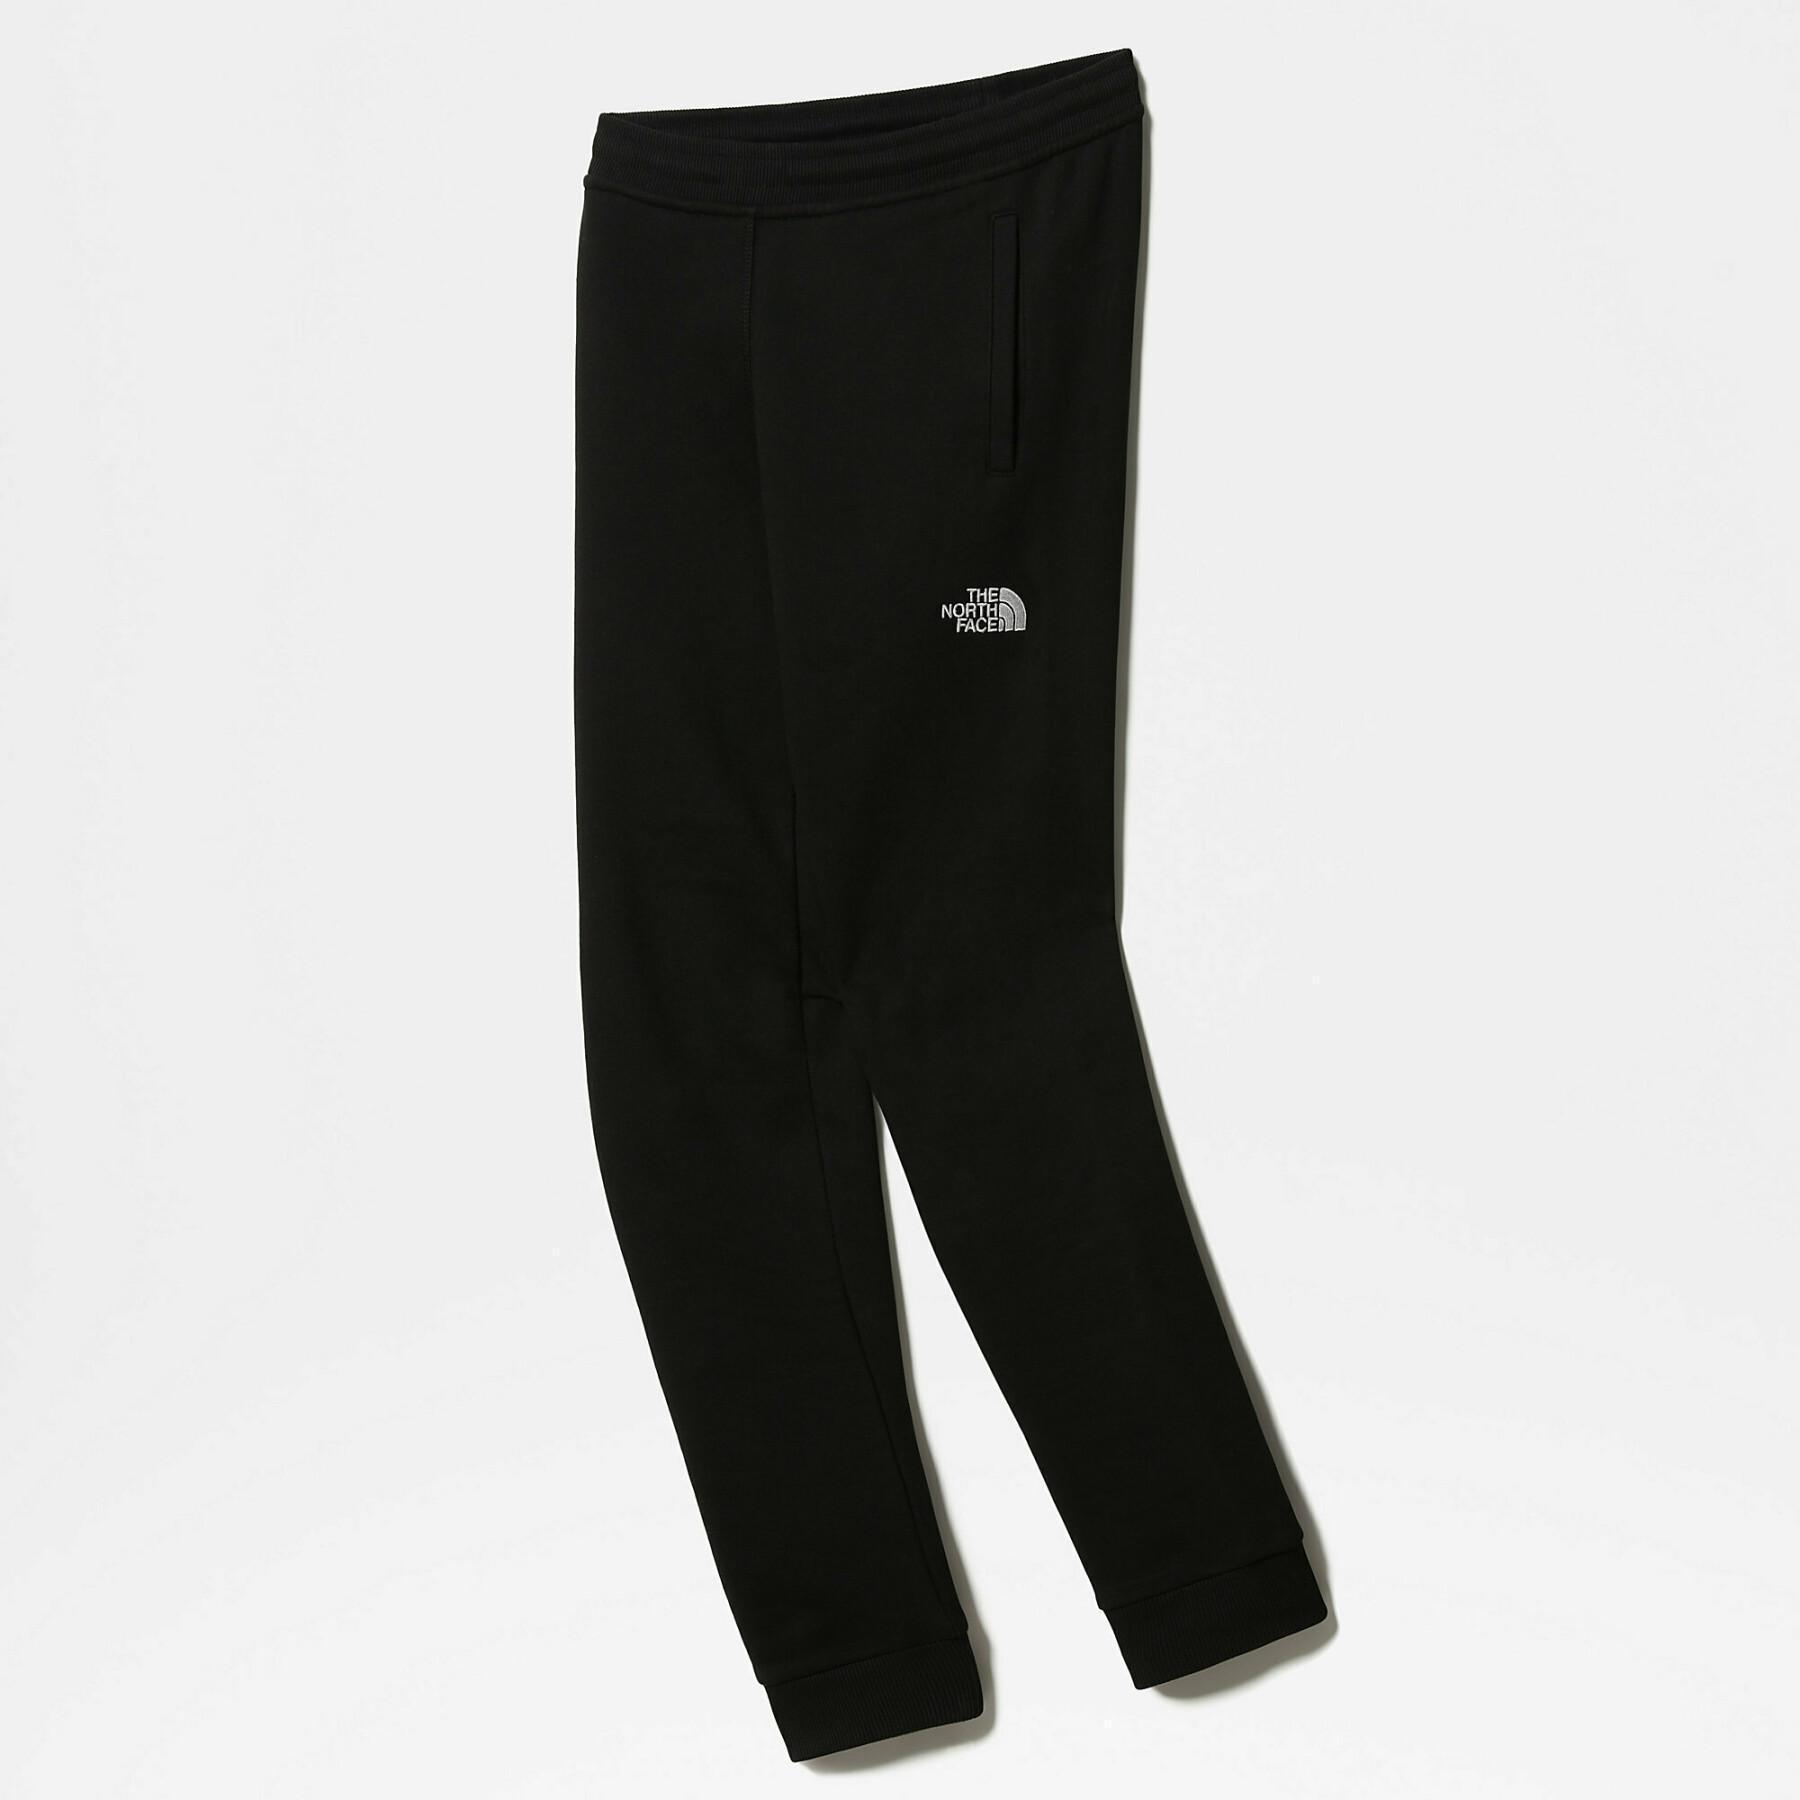 Children's fleece trousers The North Face